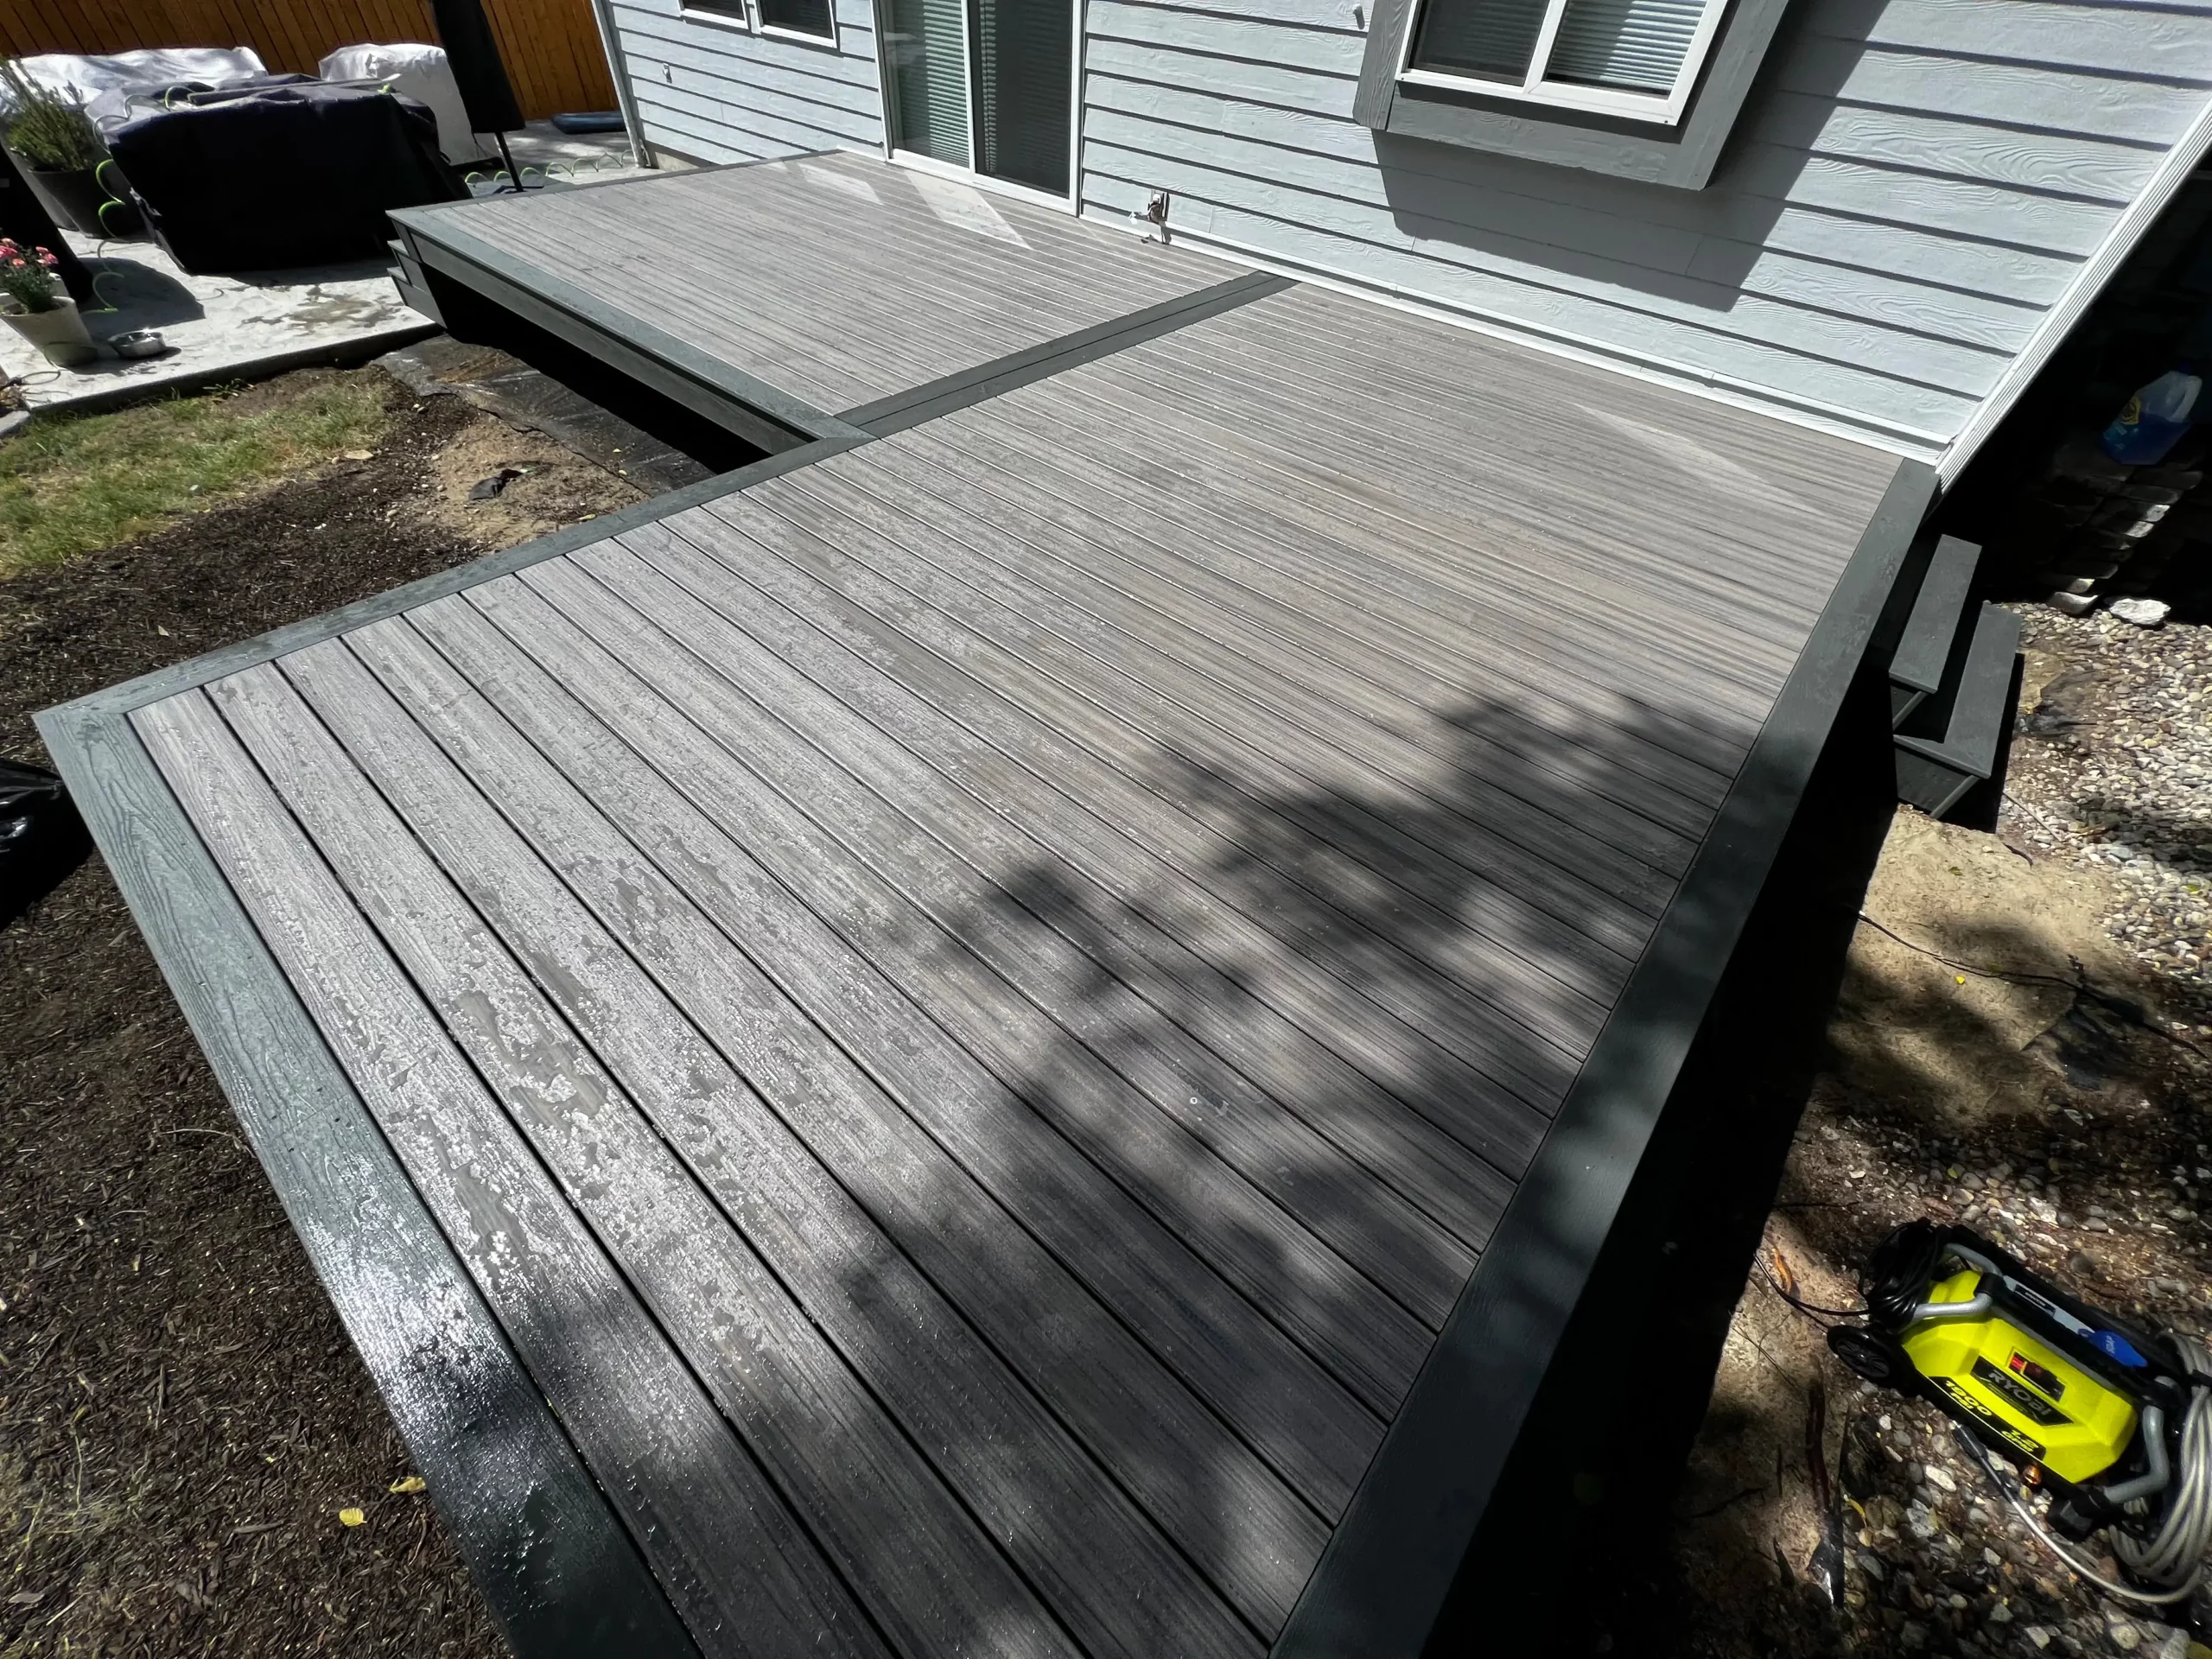 Why is it so expensive to build a deck in Tacoma?